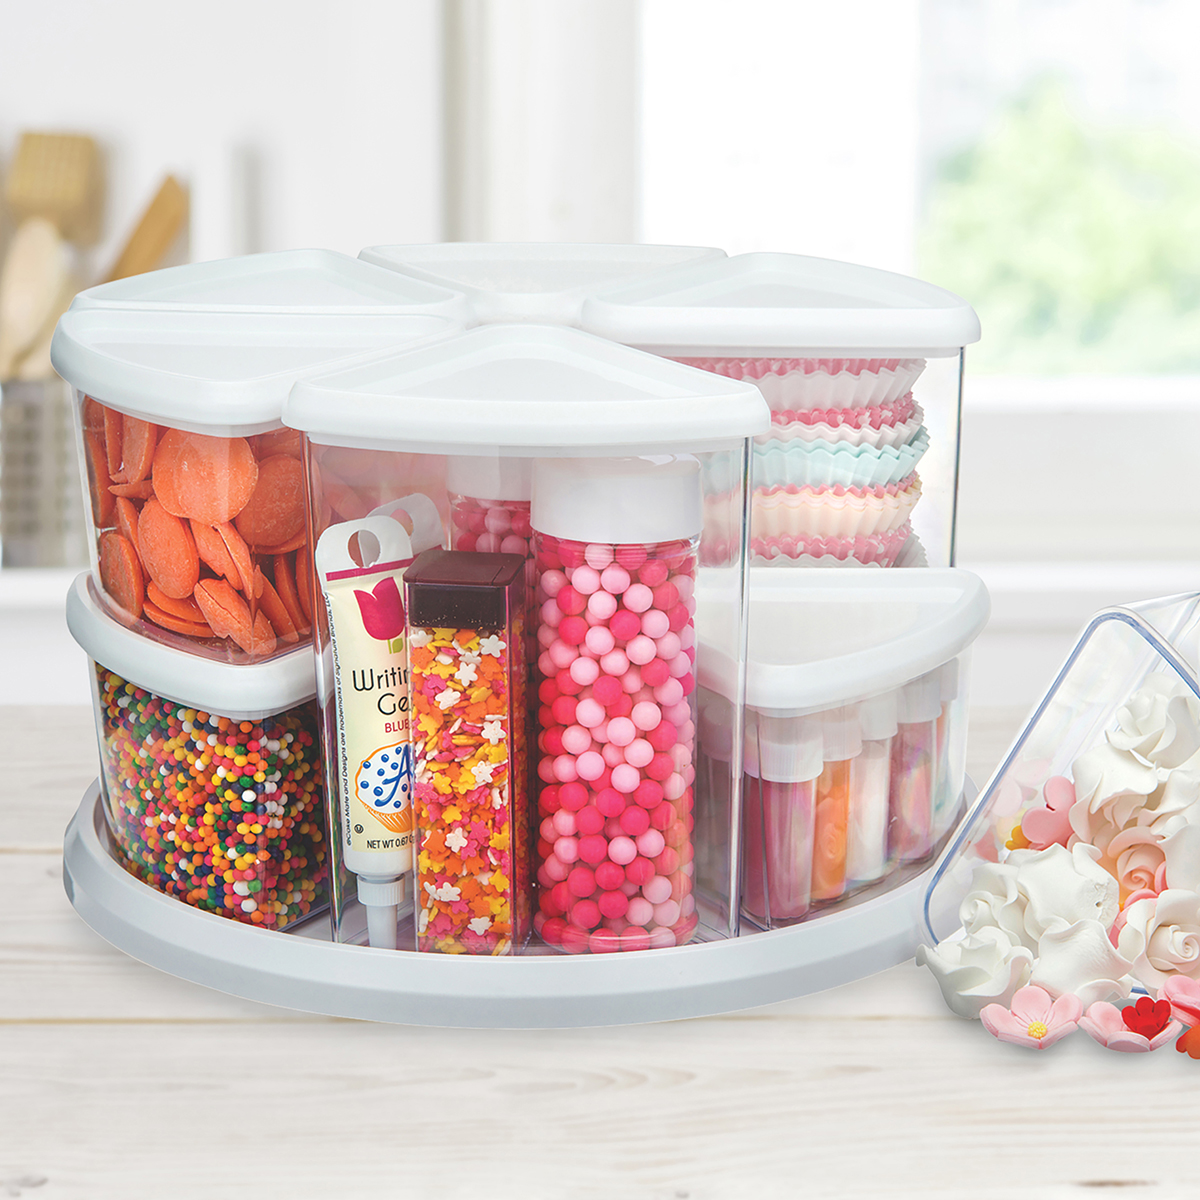 https://www.containerstore.com/catalogimages/392478/10080741-Deflecto-Rotating-Organizer.jpg